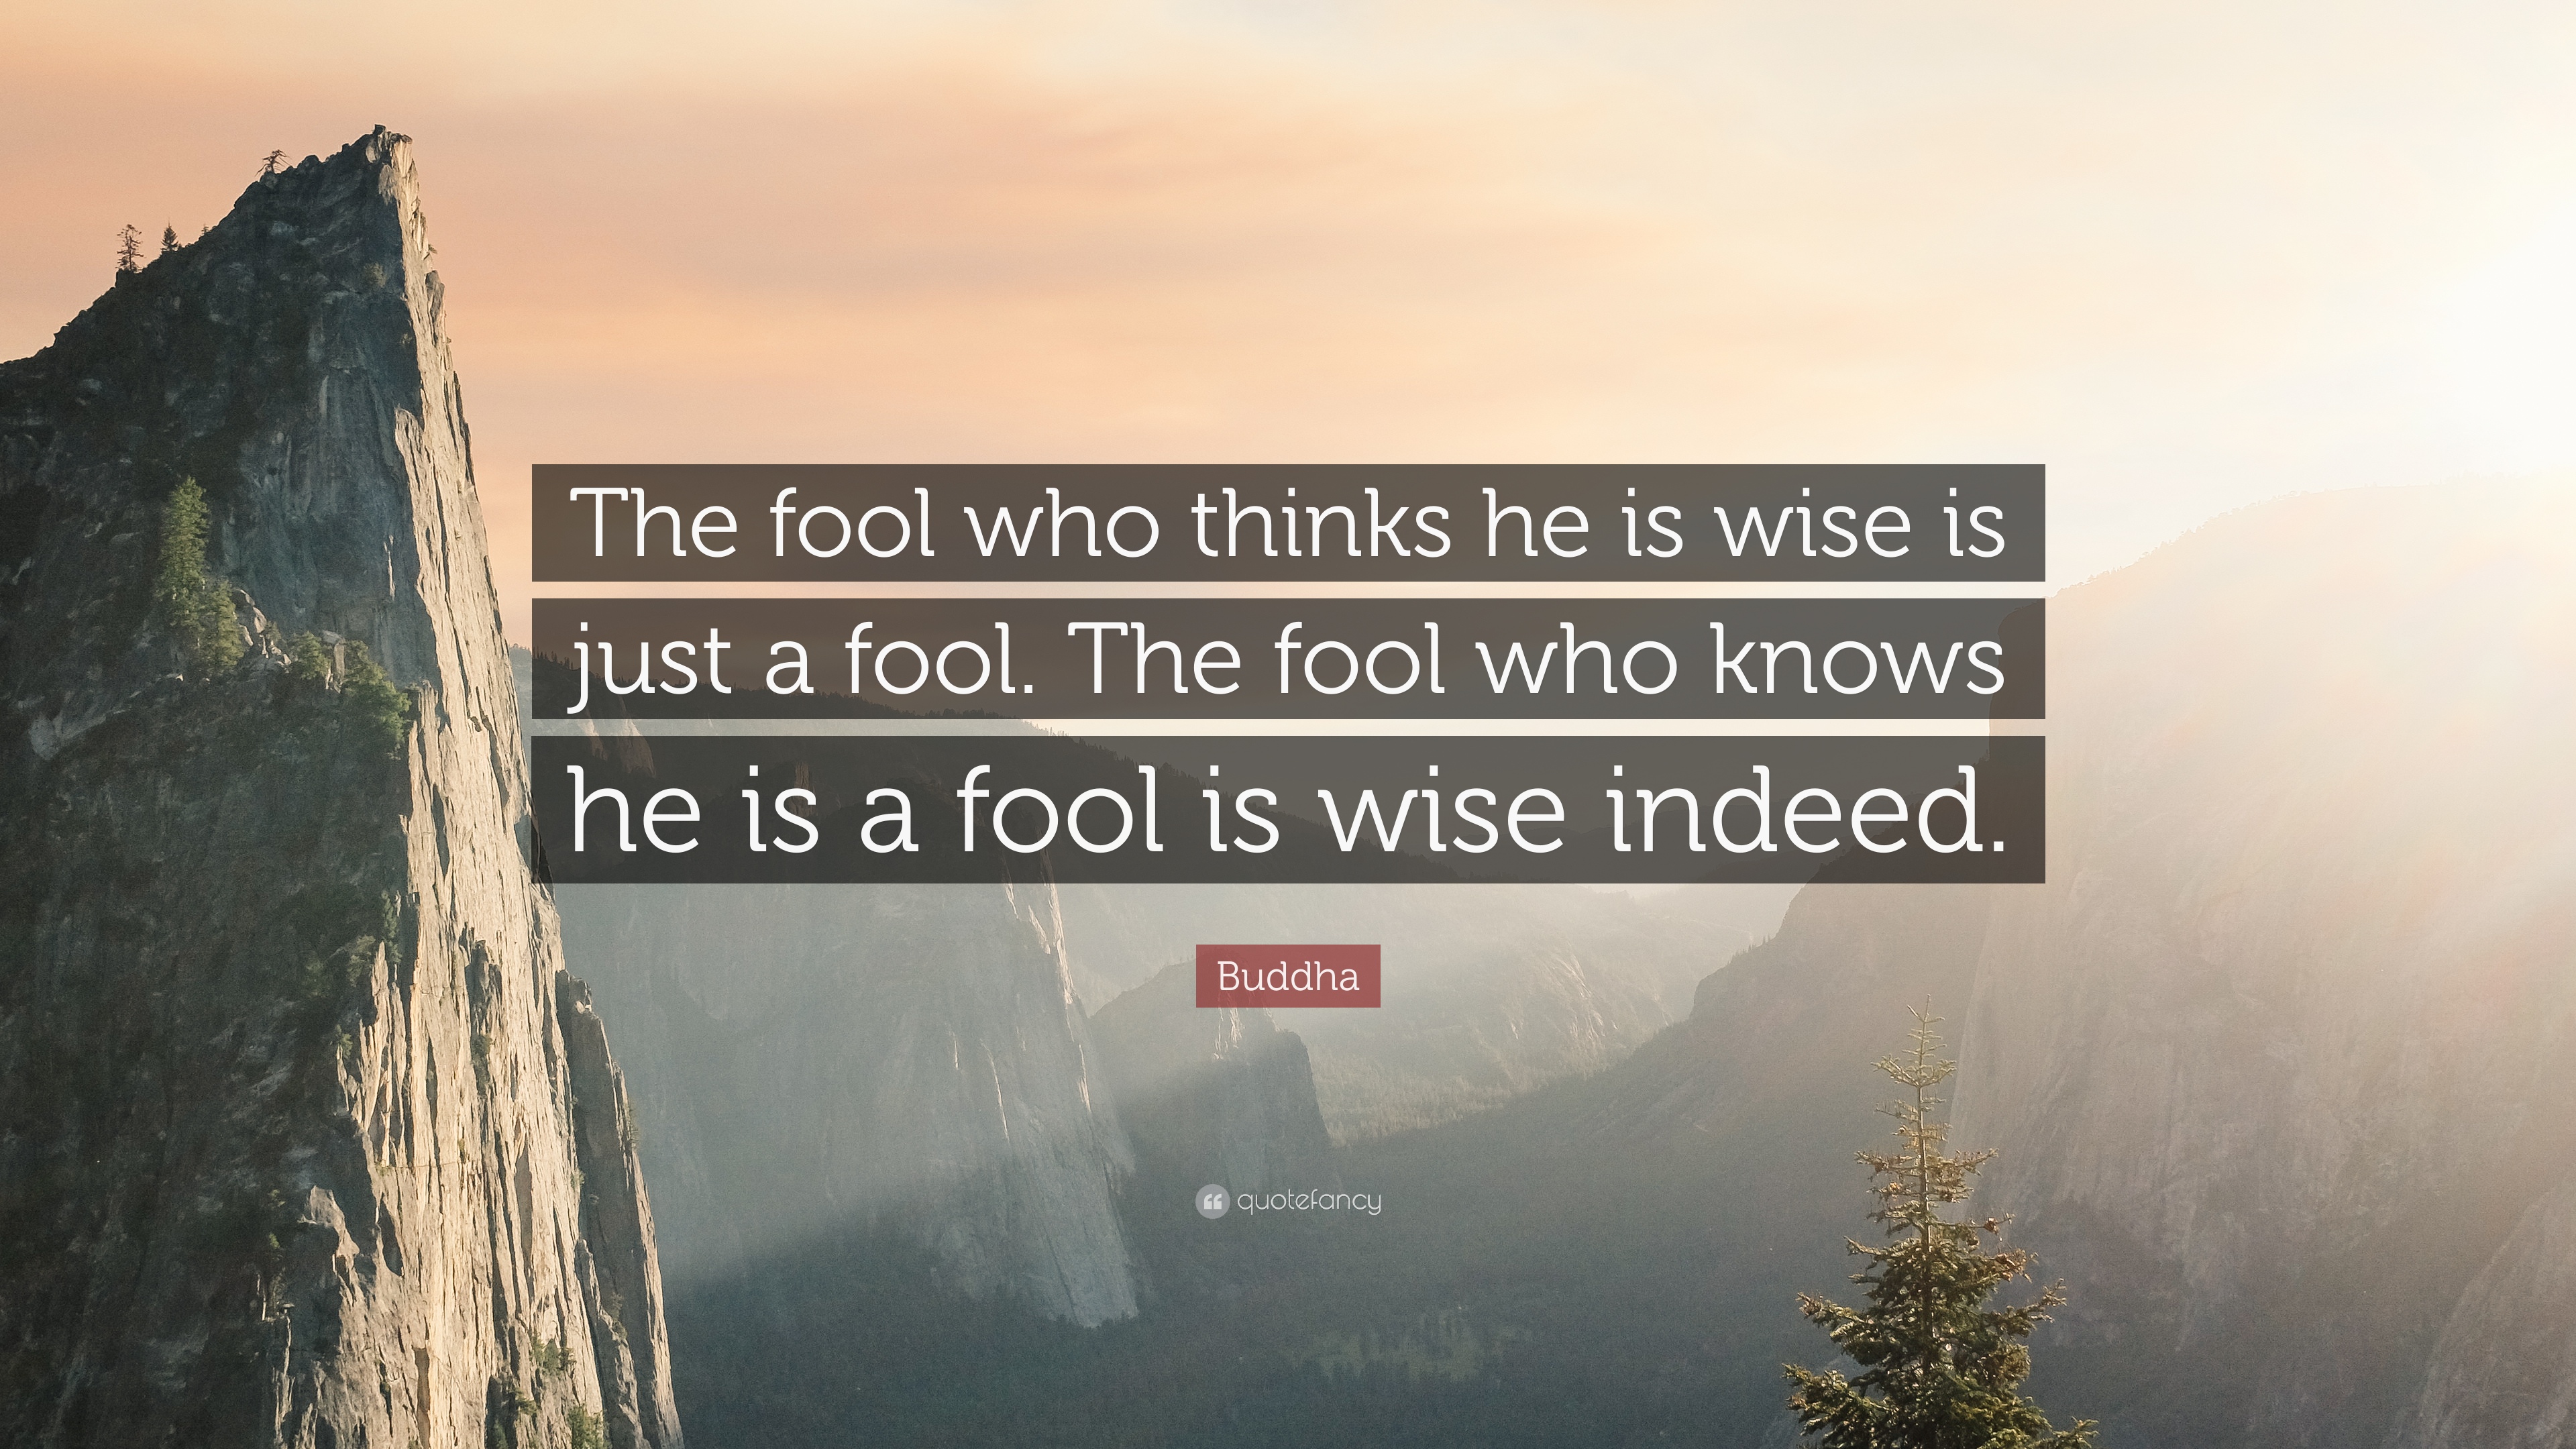 the fool who thinks he is wise is just a fool. the fool who knows he is a fool is wise indeed. buddha